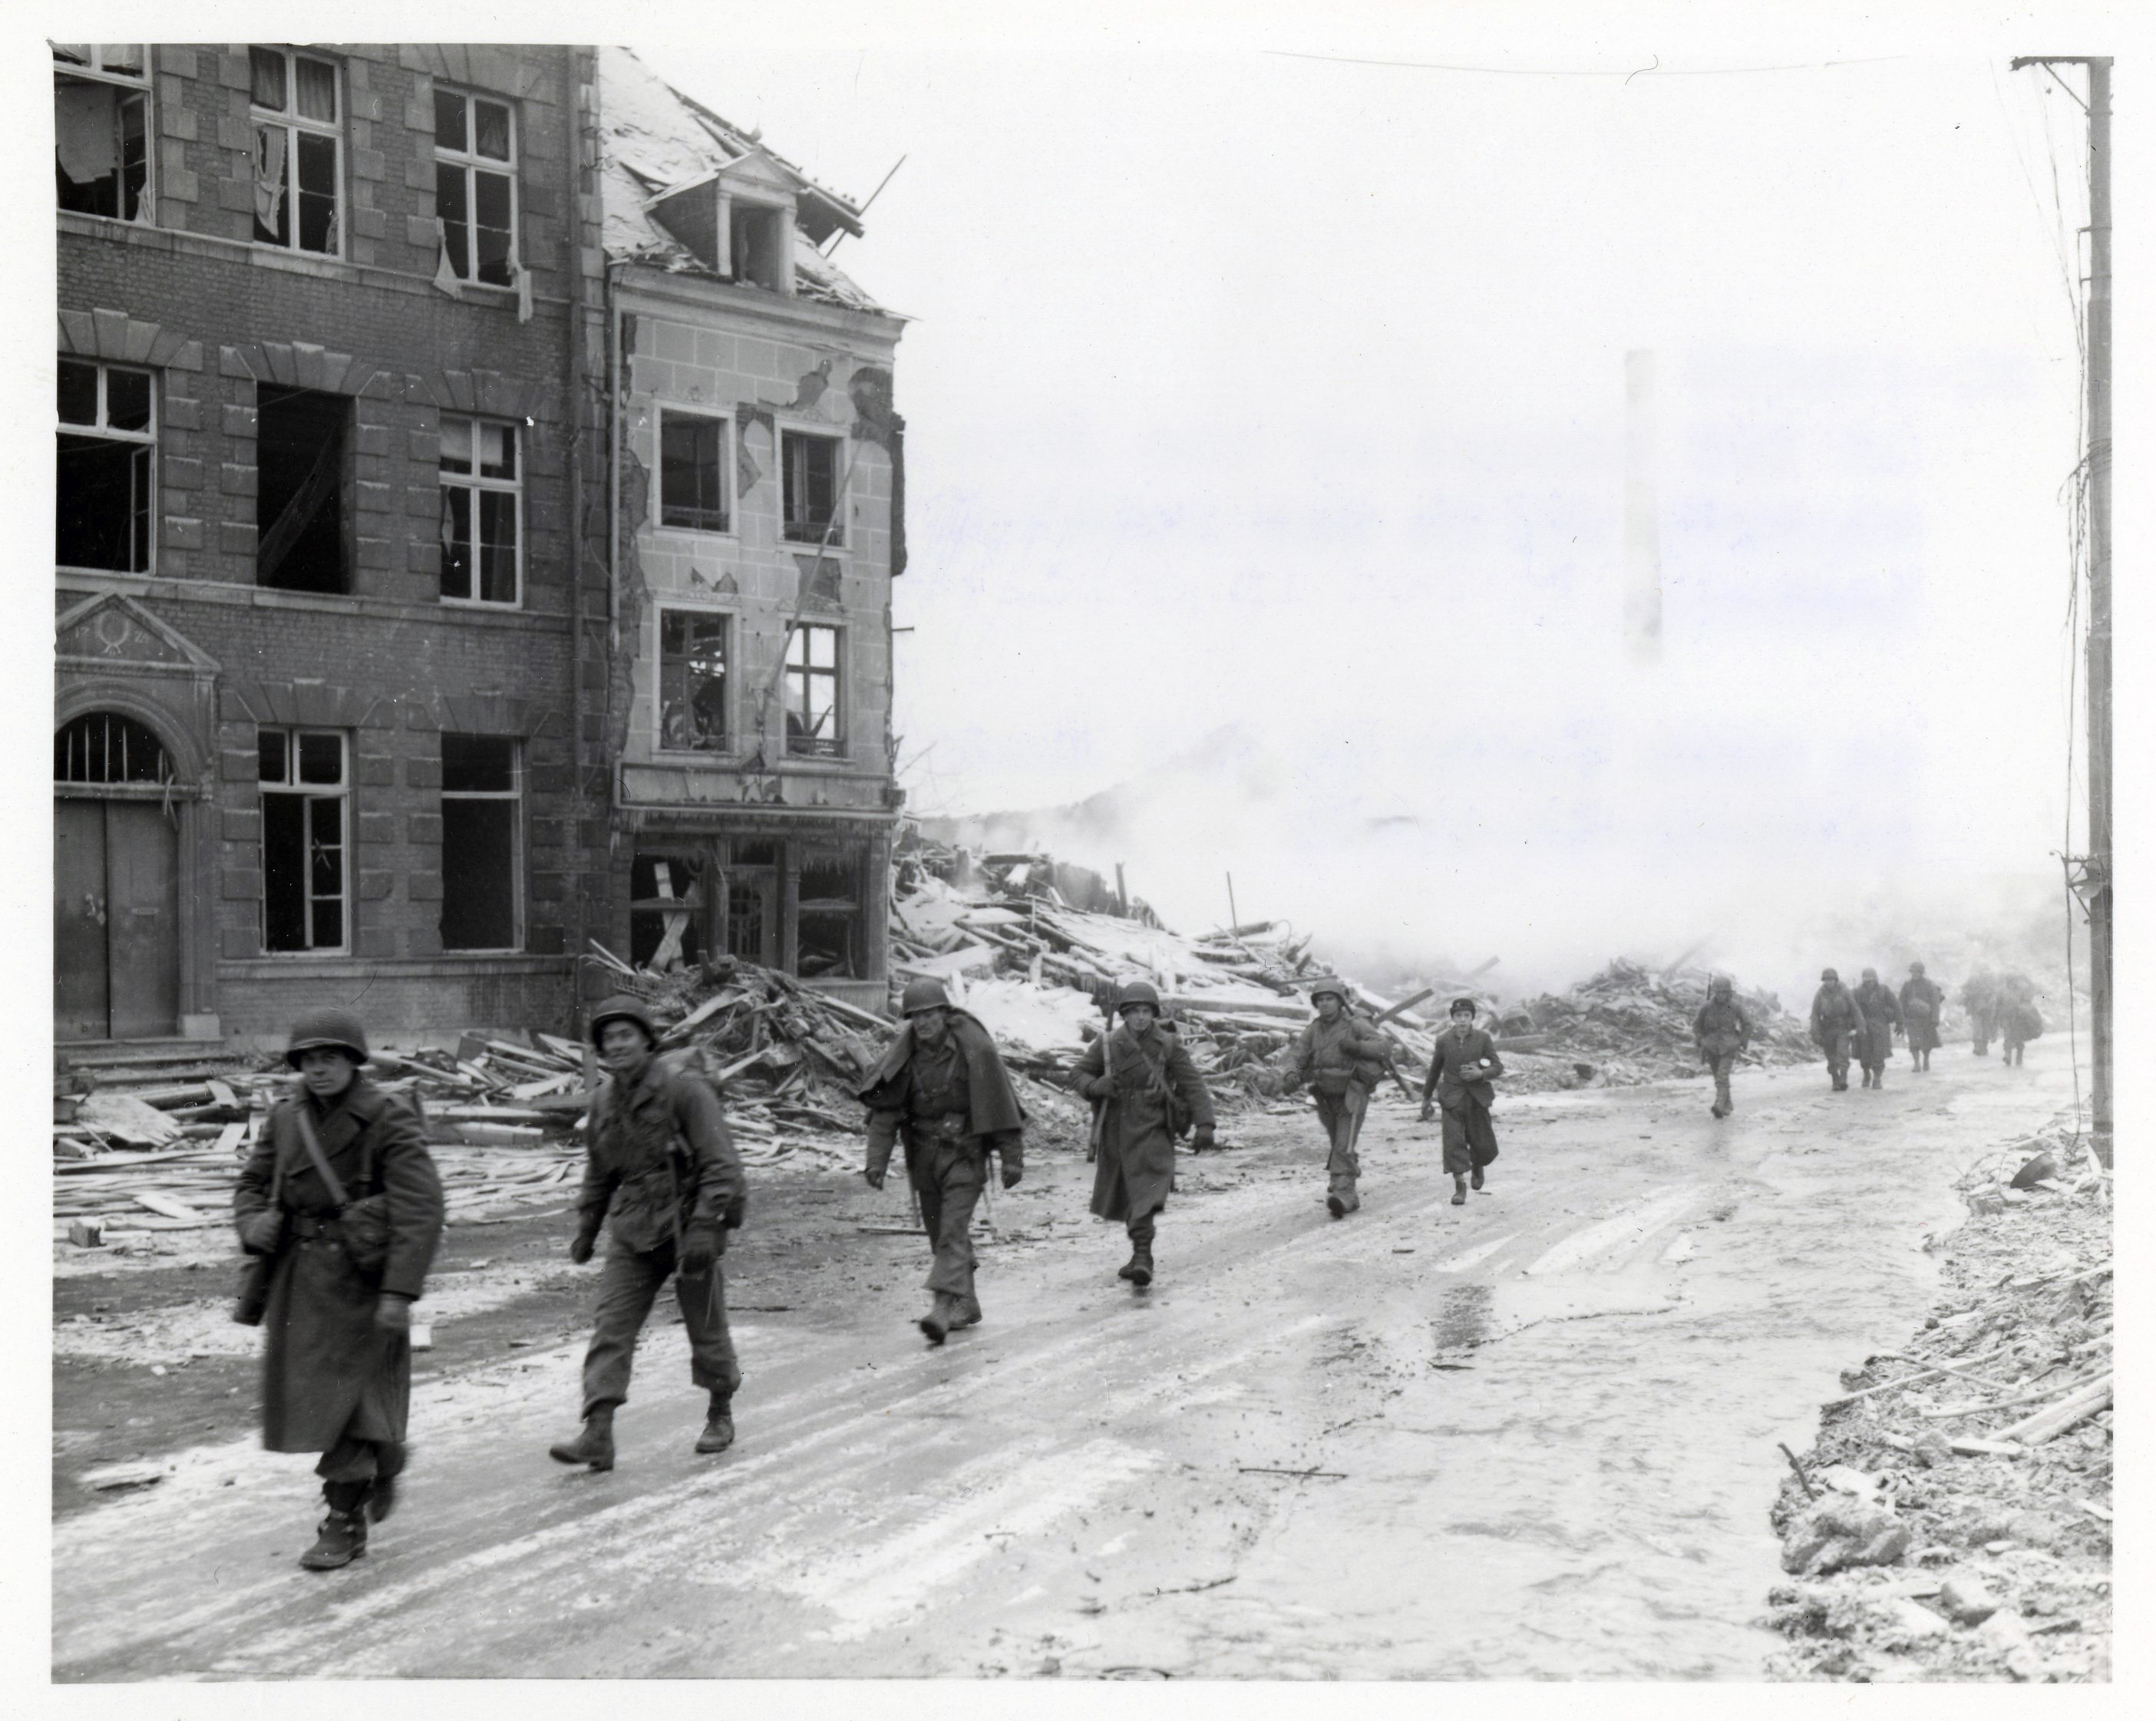 111-SC-236024_-_U.S._Inf_troops_of_the_30th_Div_on_march_through_Malmedy_which_was_leveled_in_...jpg